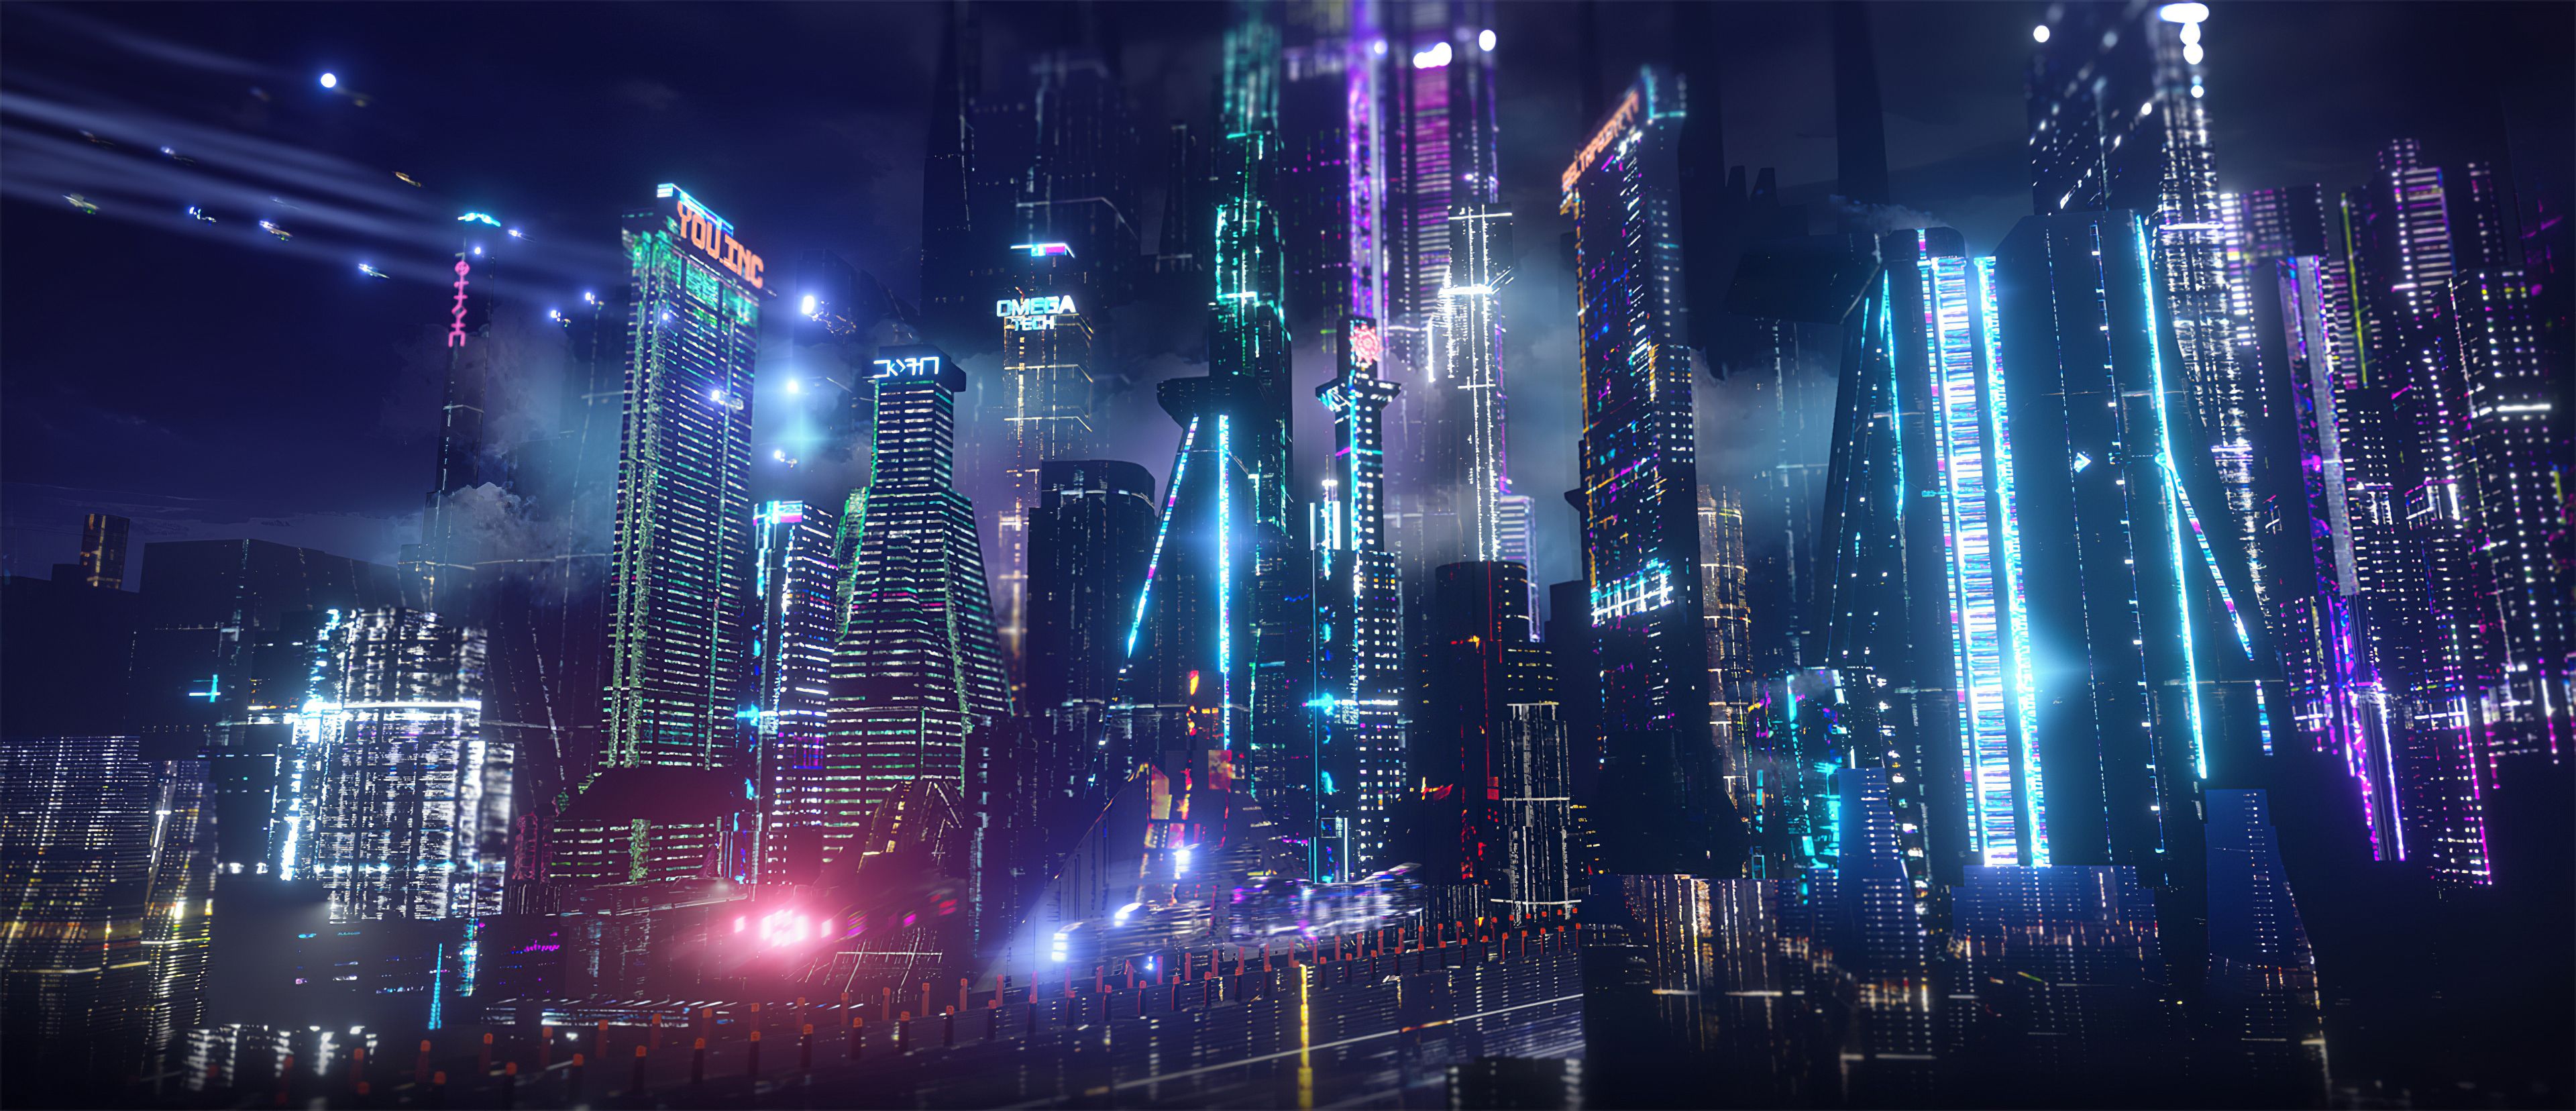 Neon City Lights 4k 1366x768 Resolution HD 4k Wallpaper, Image, Background, Photo and Picture